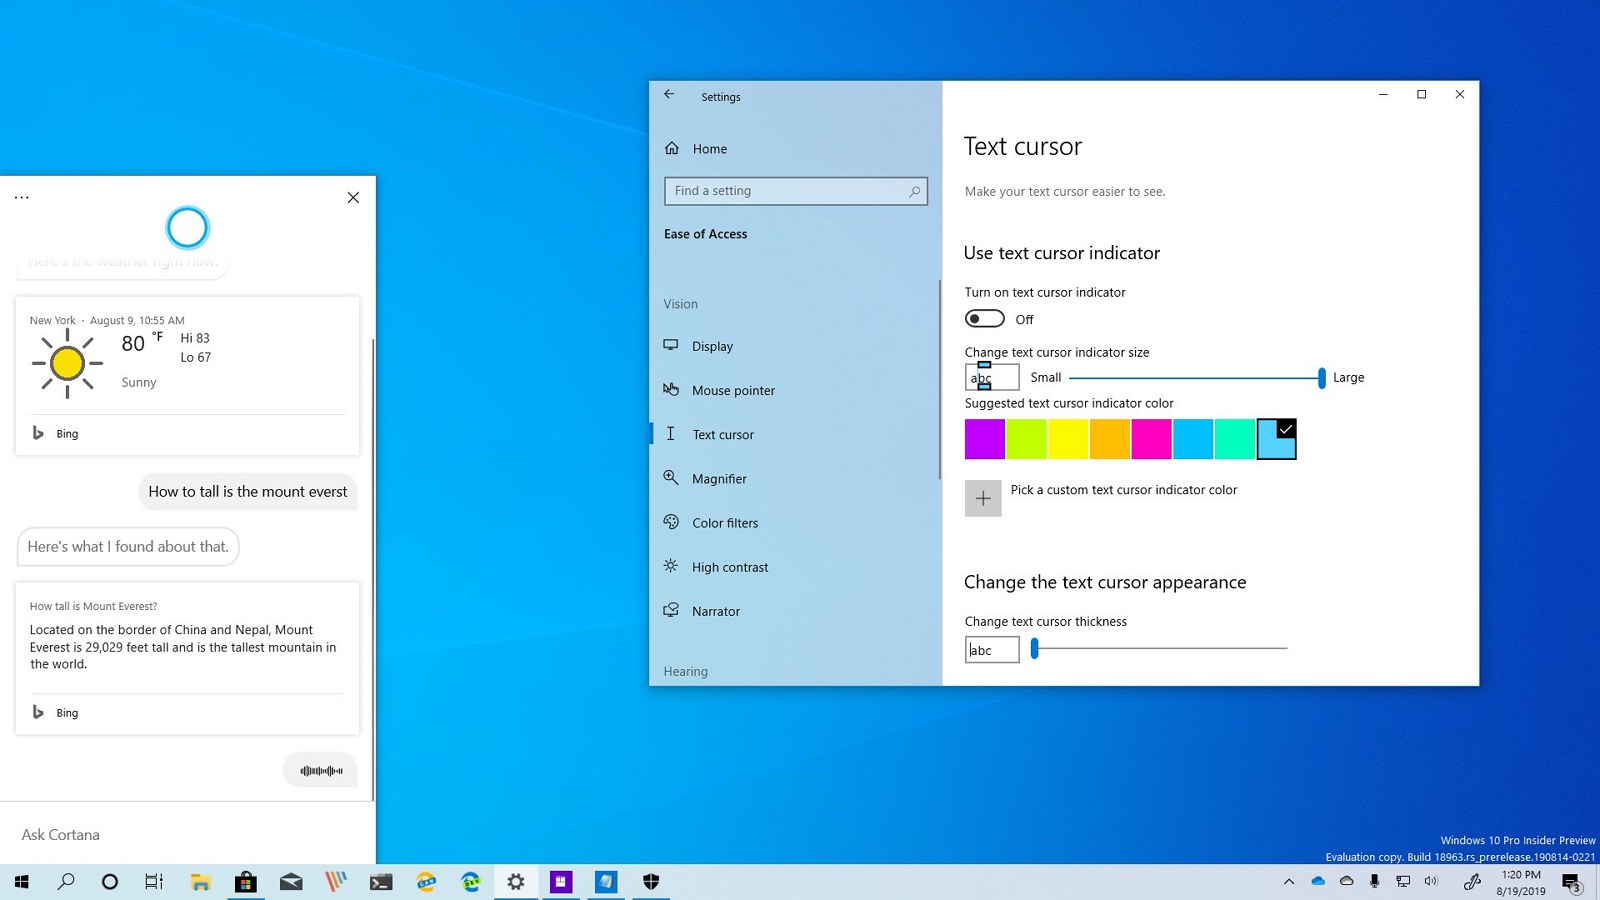 Windows 10 build 18963 hands-on review